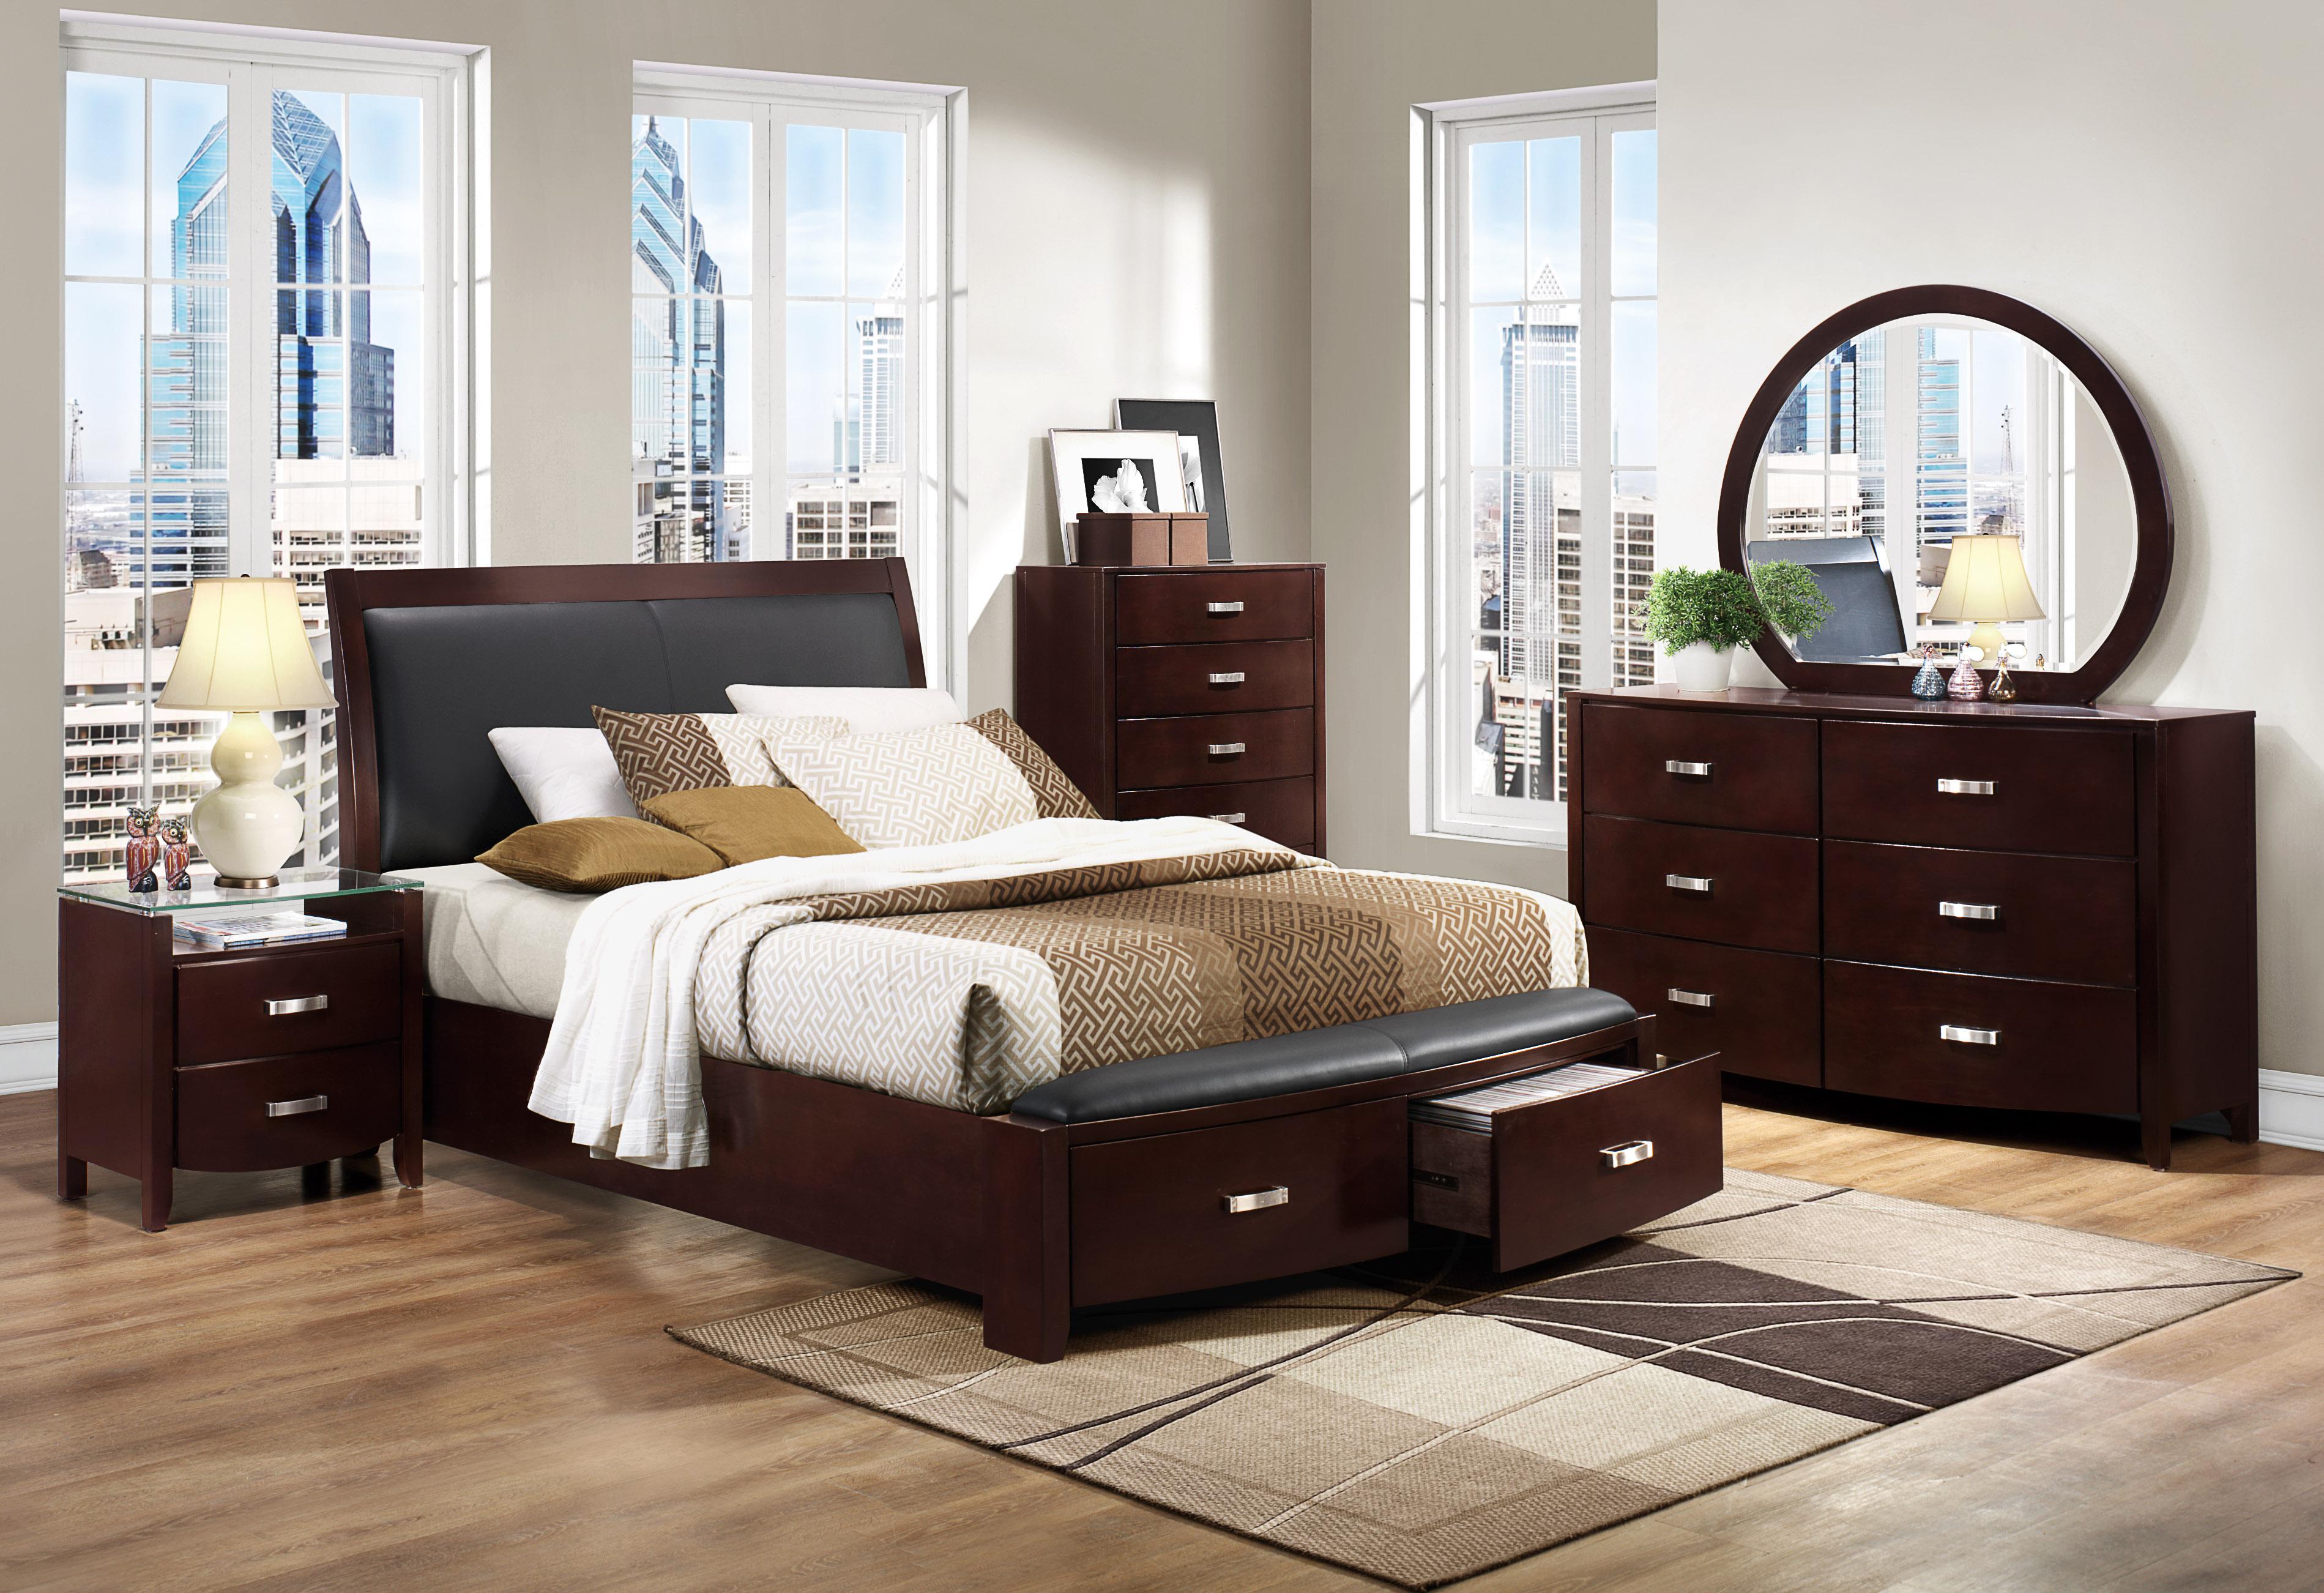 Contemporary Bedroom Set 1737NC-1-5PC Lyric 1737NC-1-5PC in Dark Cherry Faux Leather